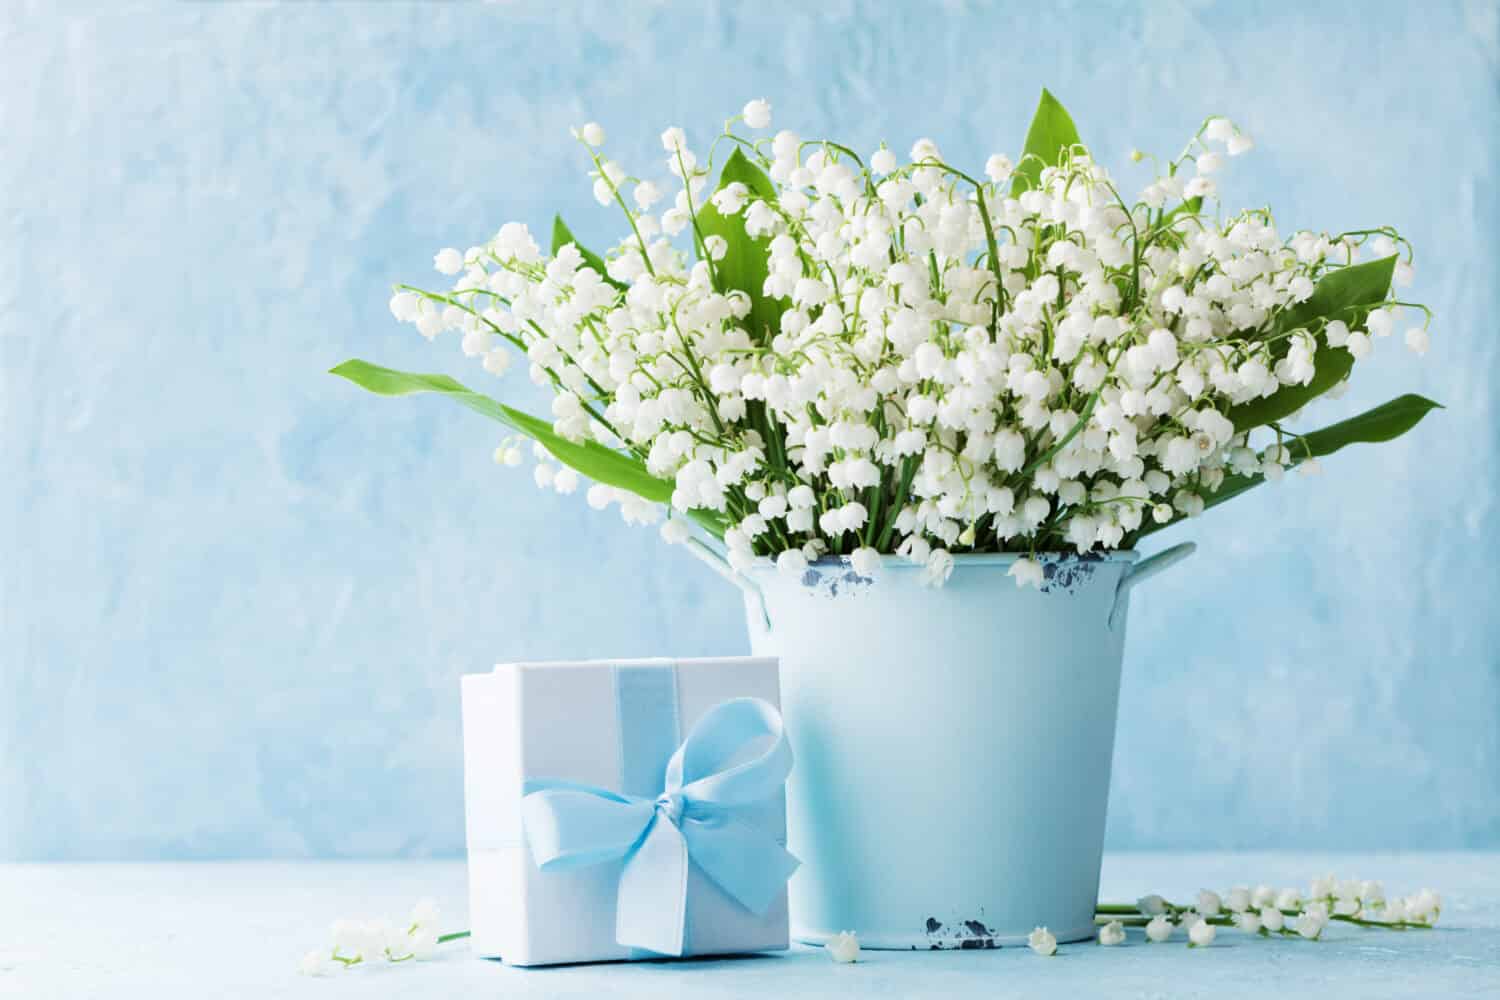 Lily of the valley flowers in blue vase and gift box against rustic wall. 